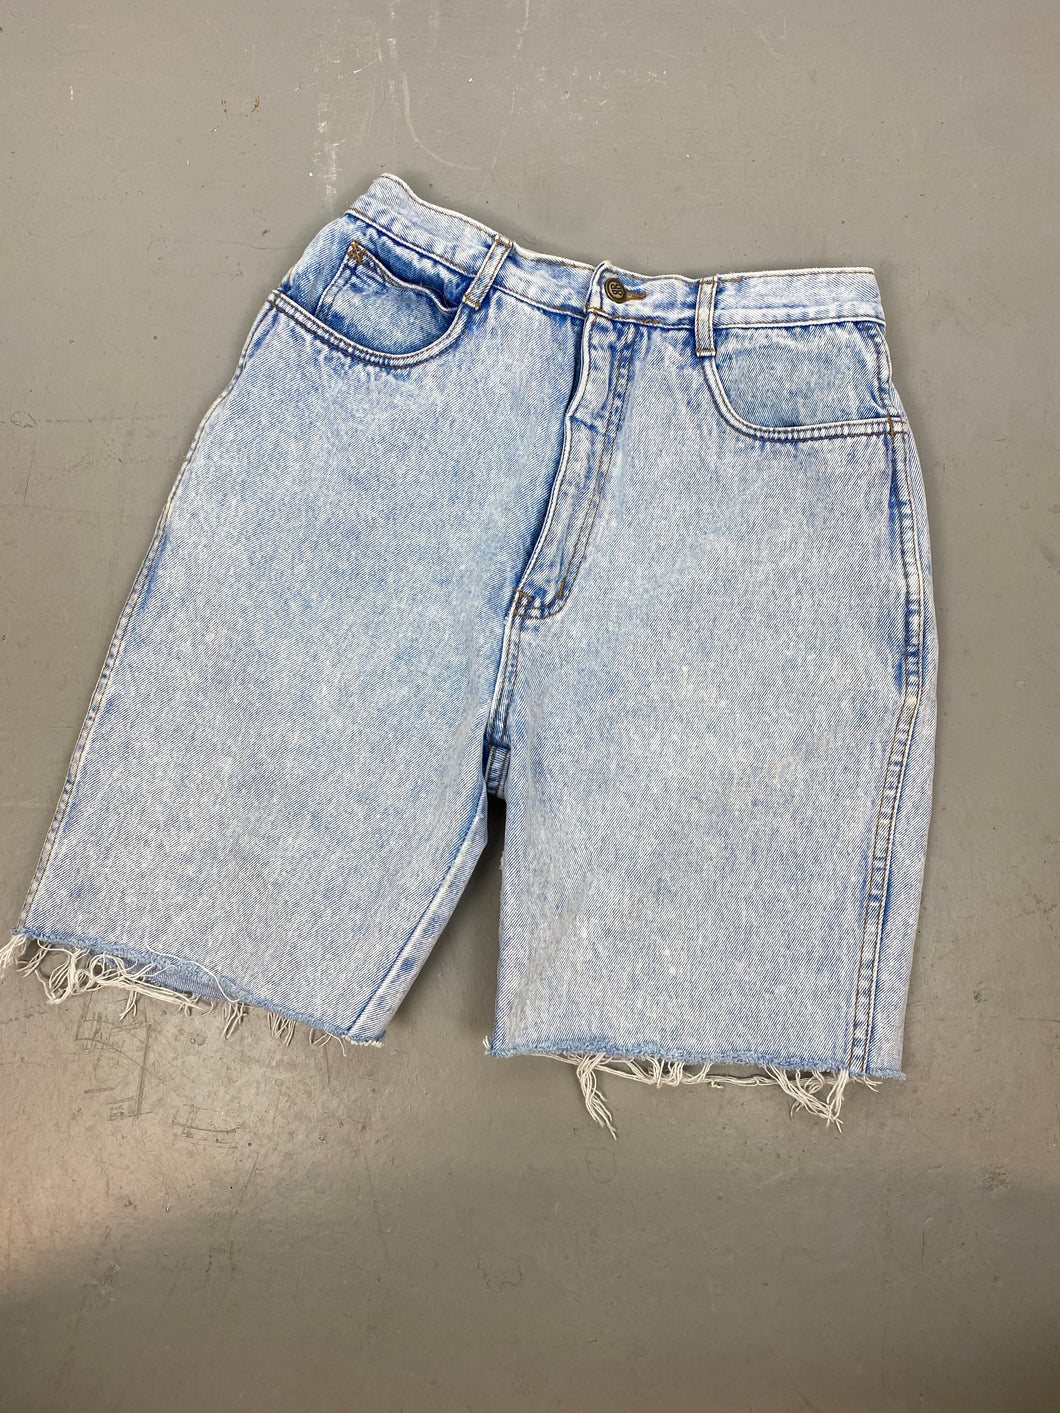 90s High Waisted Frayed Denim Shorts - 29in